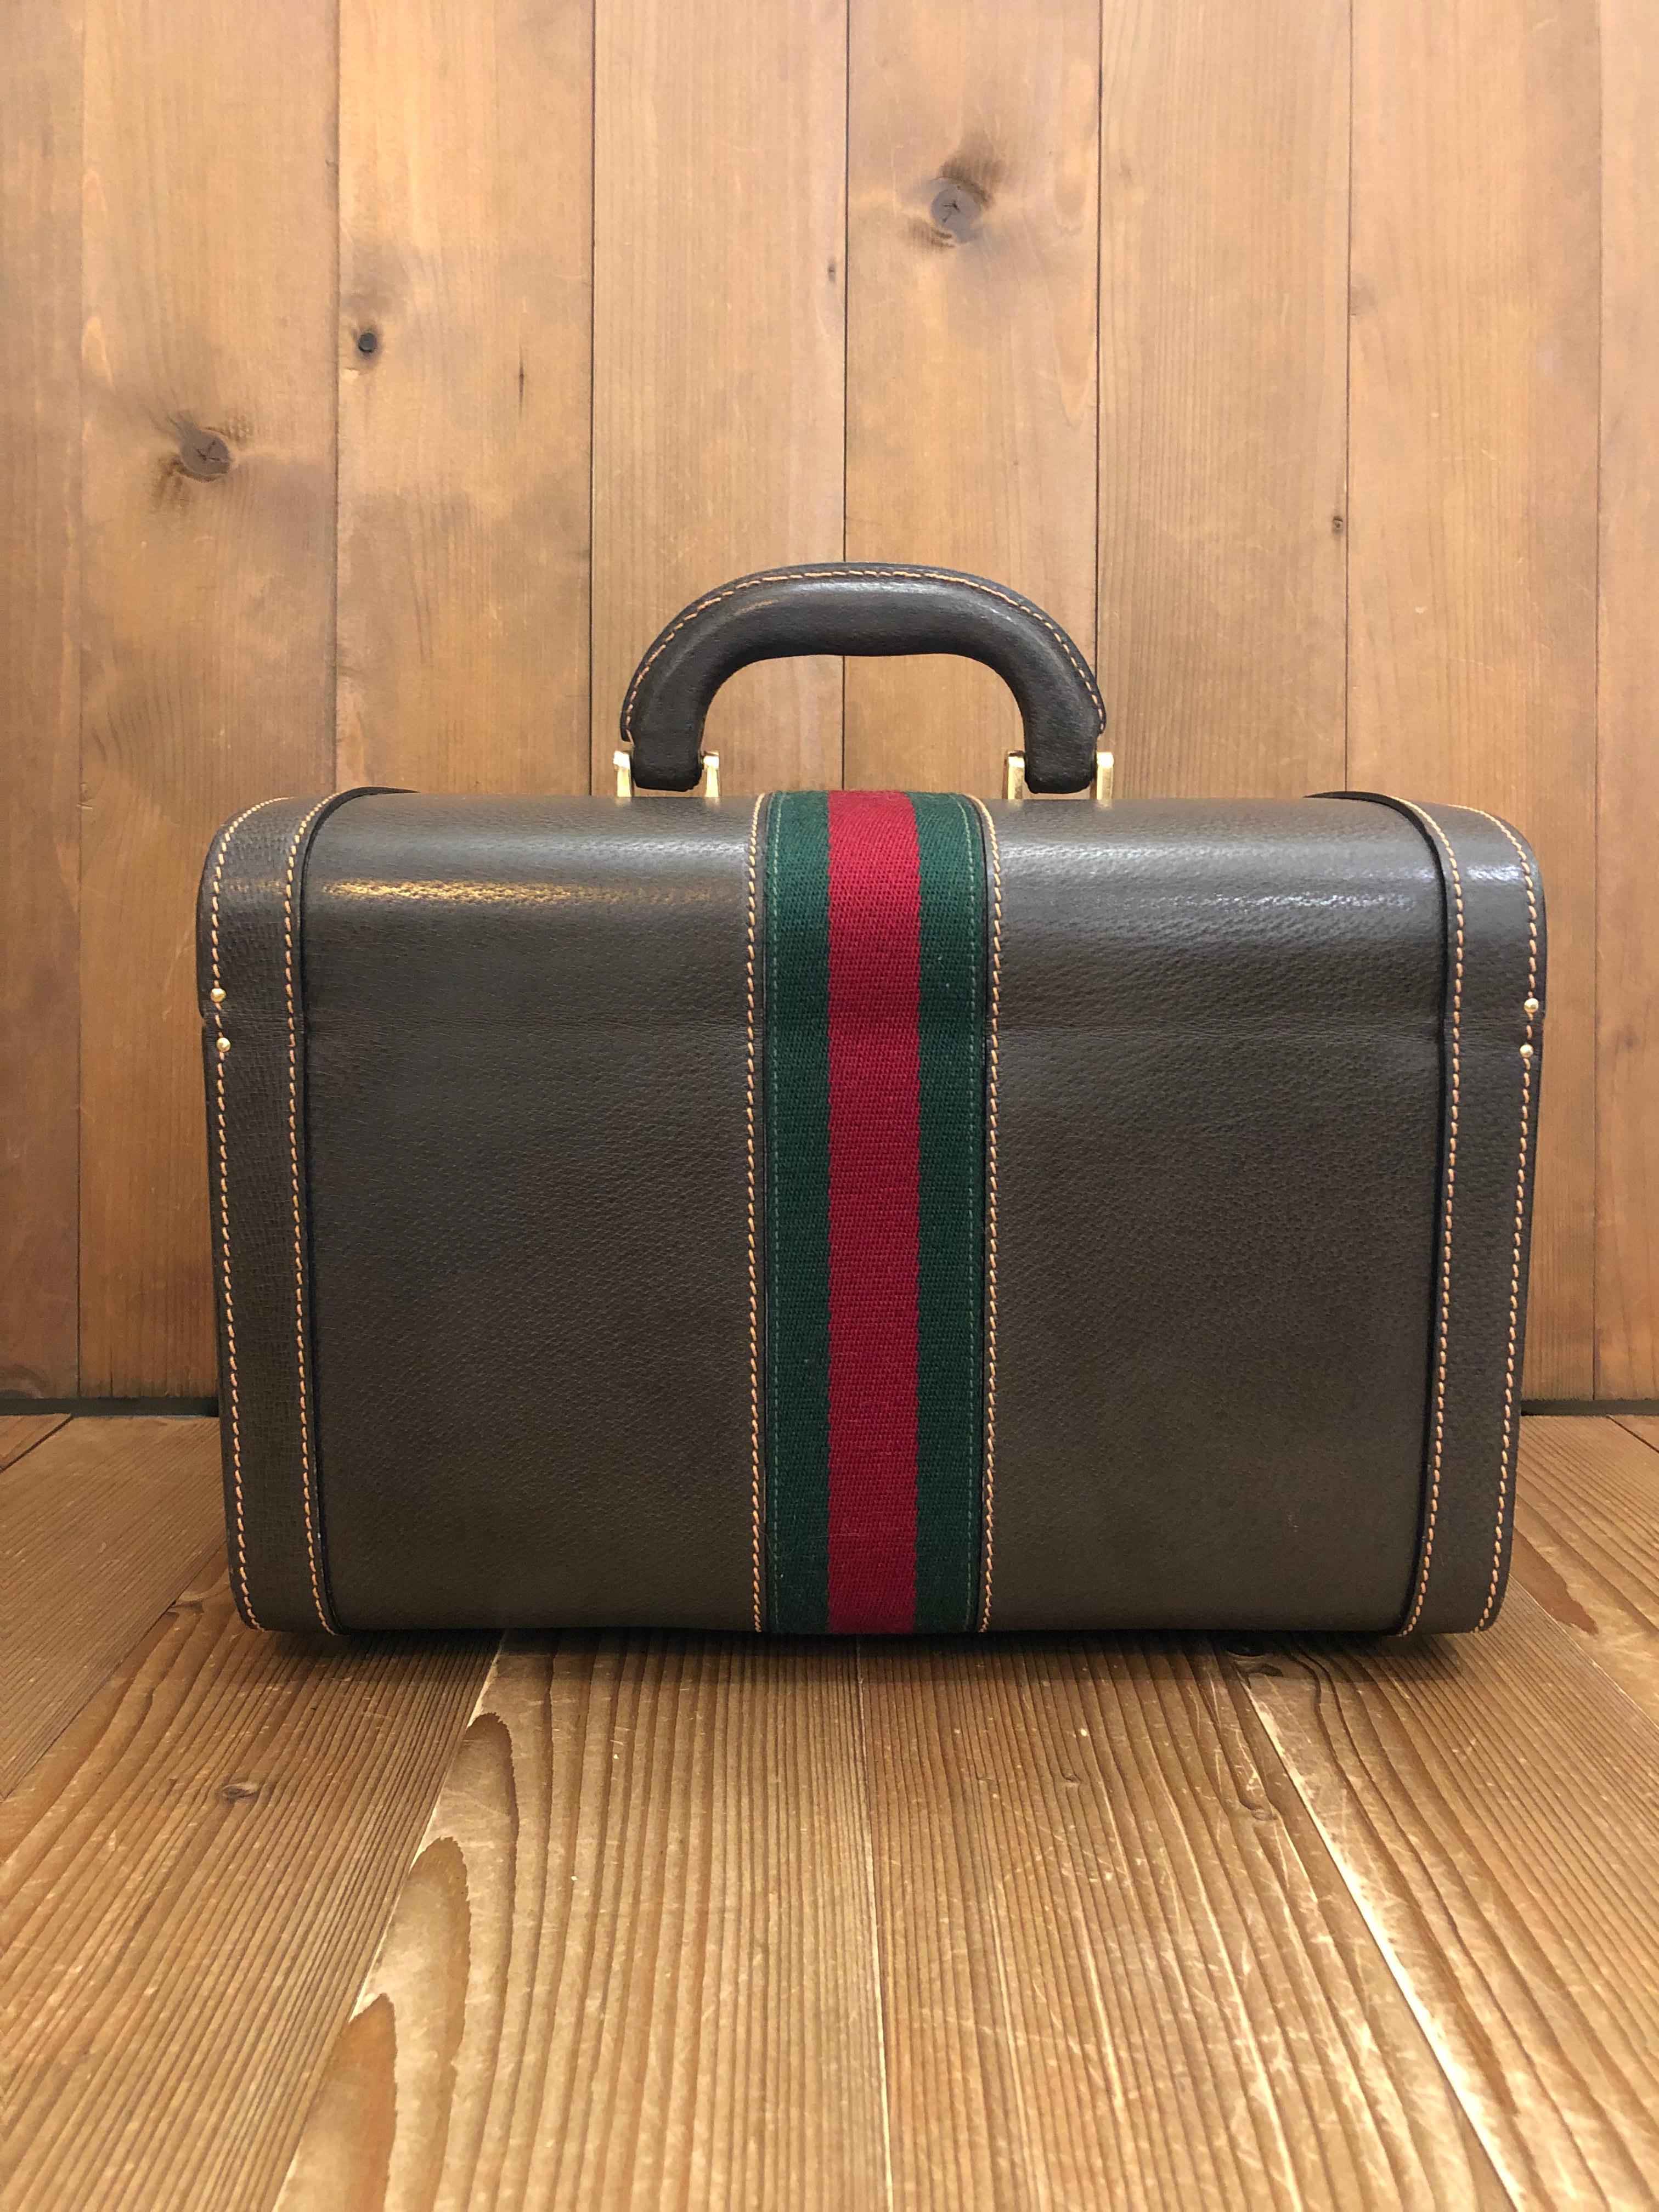 This 1970s vintage GUCCI Web Vanity trunk case is crafted of pigskin leather in brown decorated with Gucci’s iconic Web band in green and red. This trunk features a sturdy leather handle and two combination locks. Front double-locks closure opens to